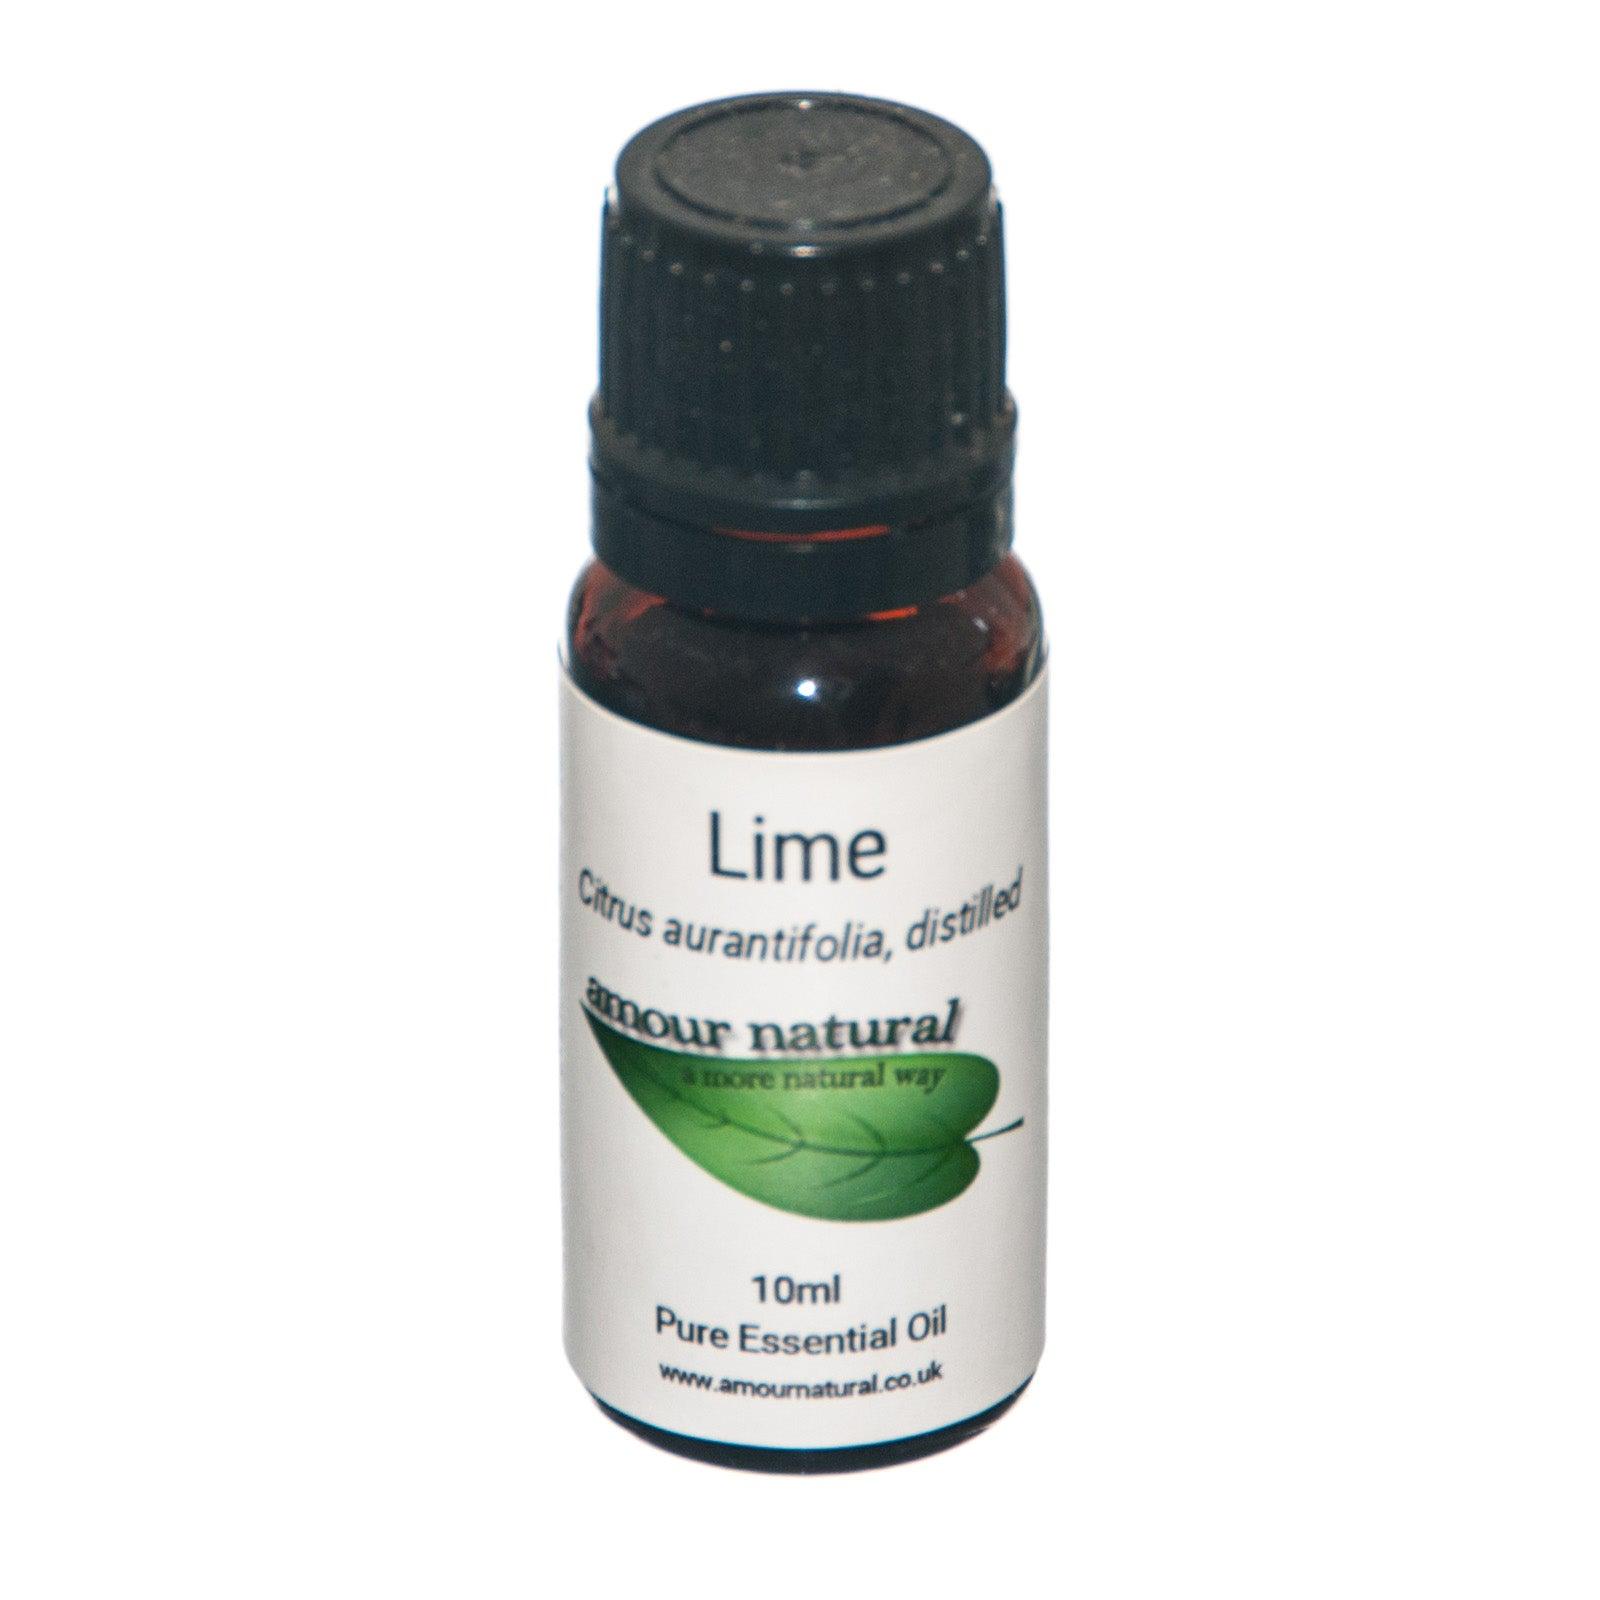 Amour Natural Lime Oil 10ml - Approved Vitamins